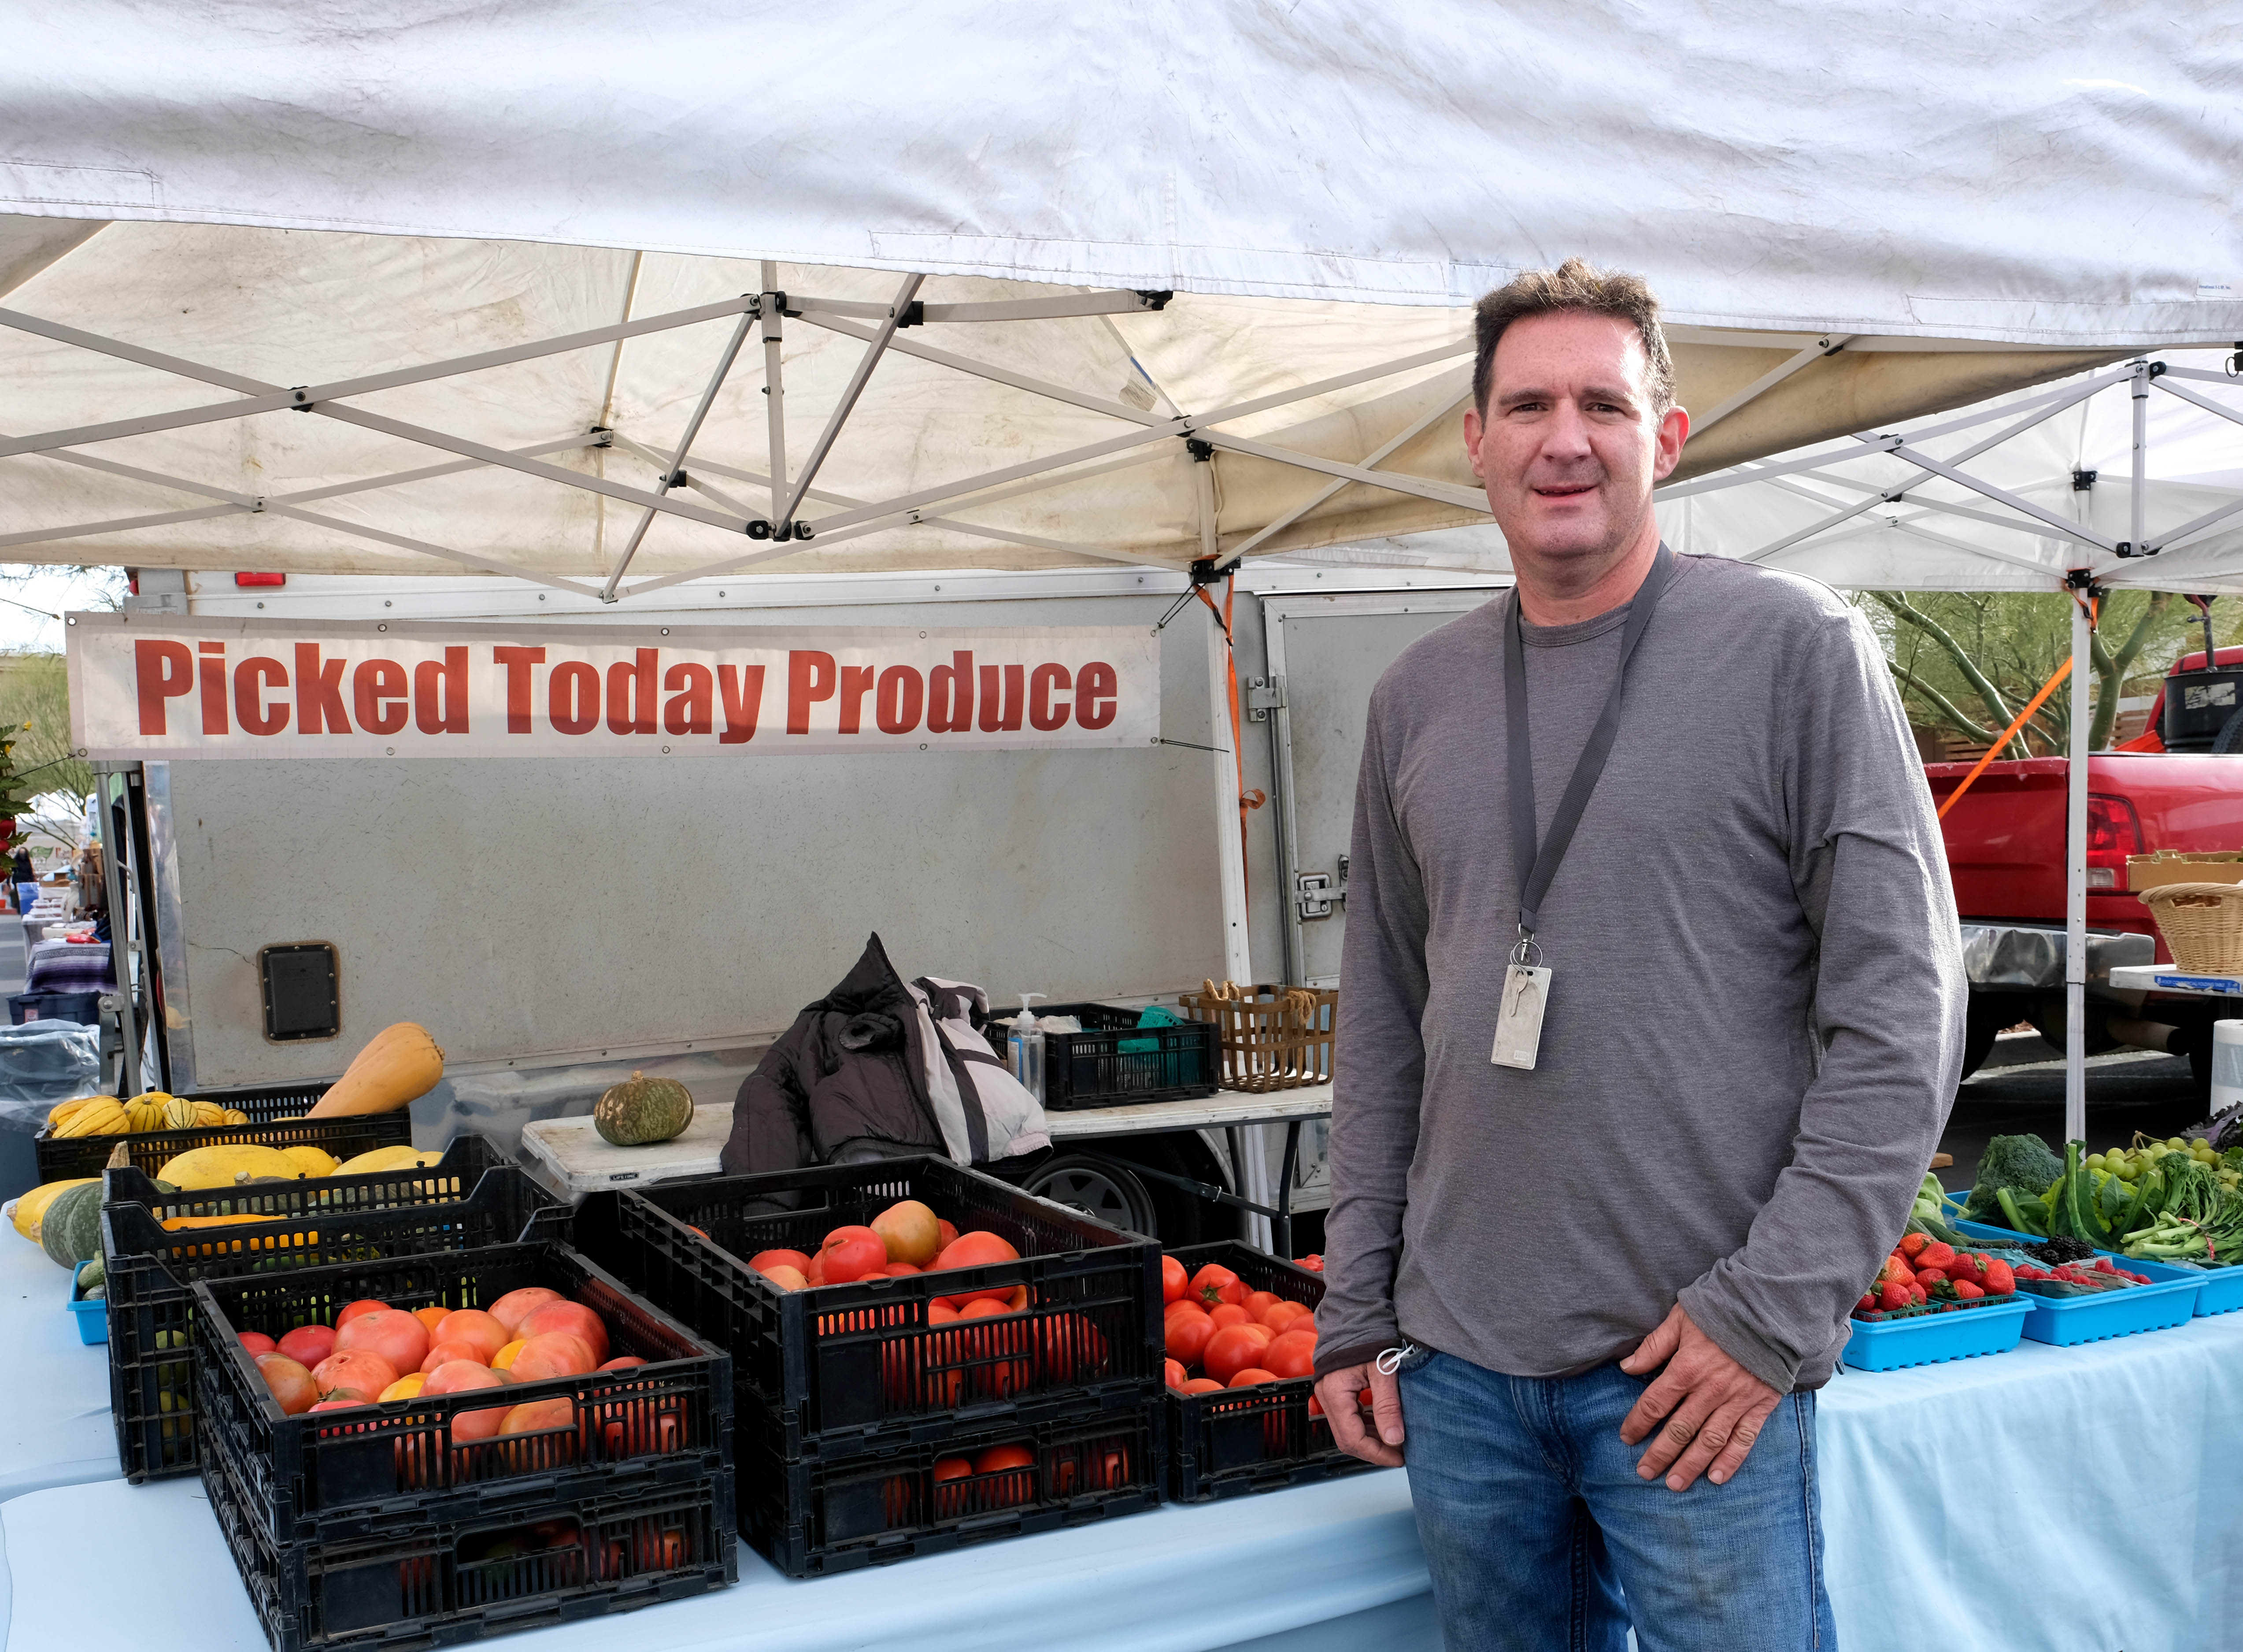 A man stands in front of a produce stand